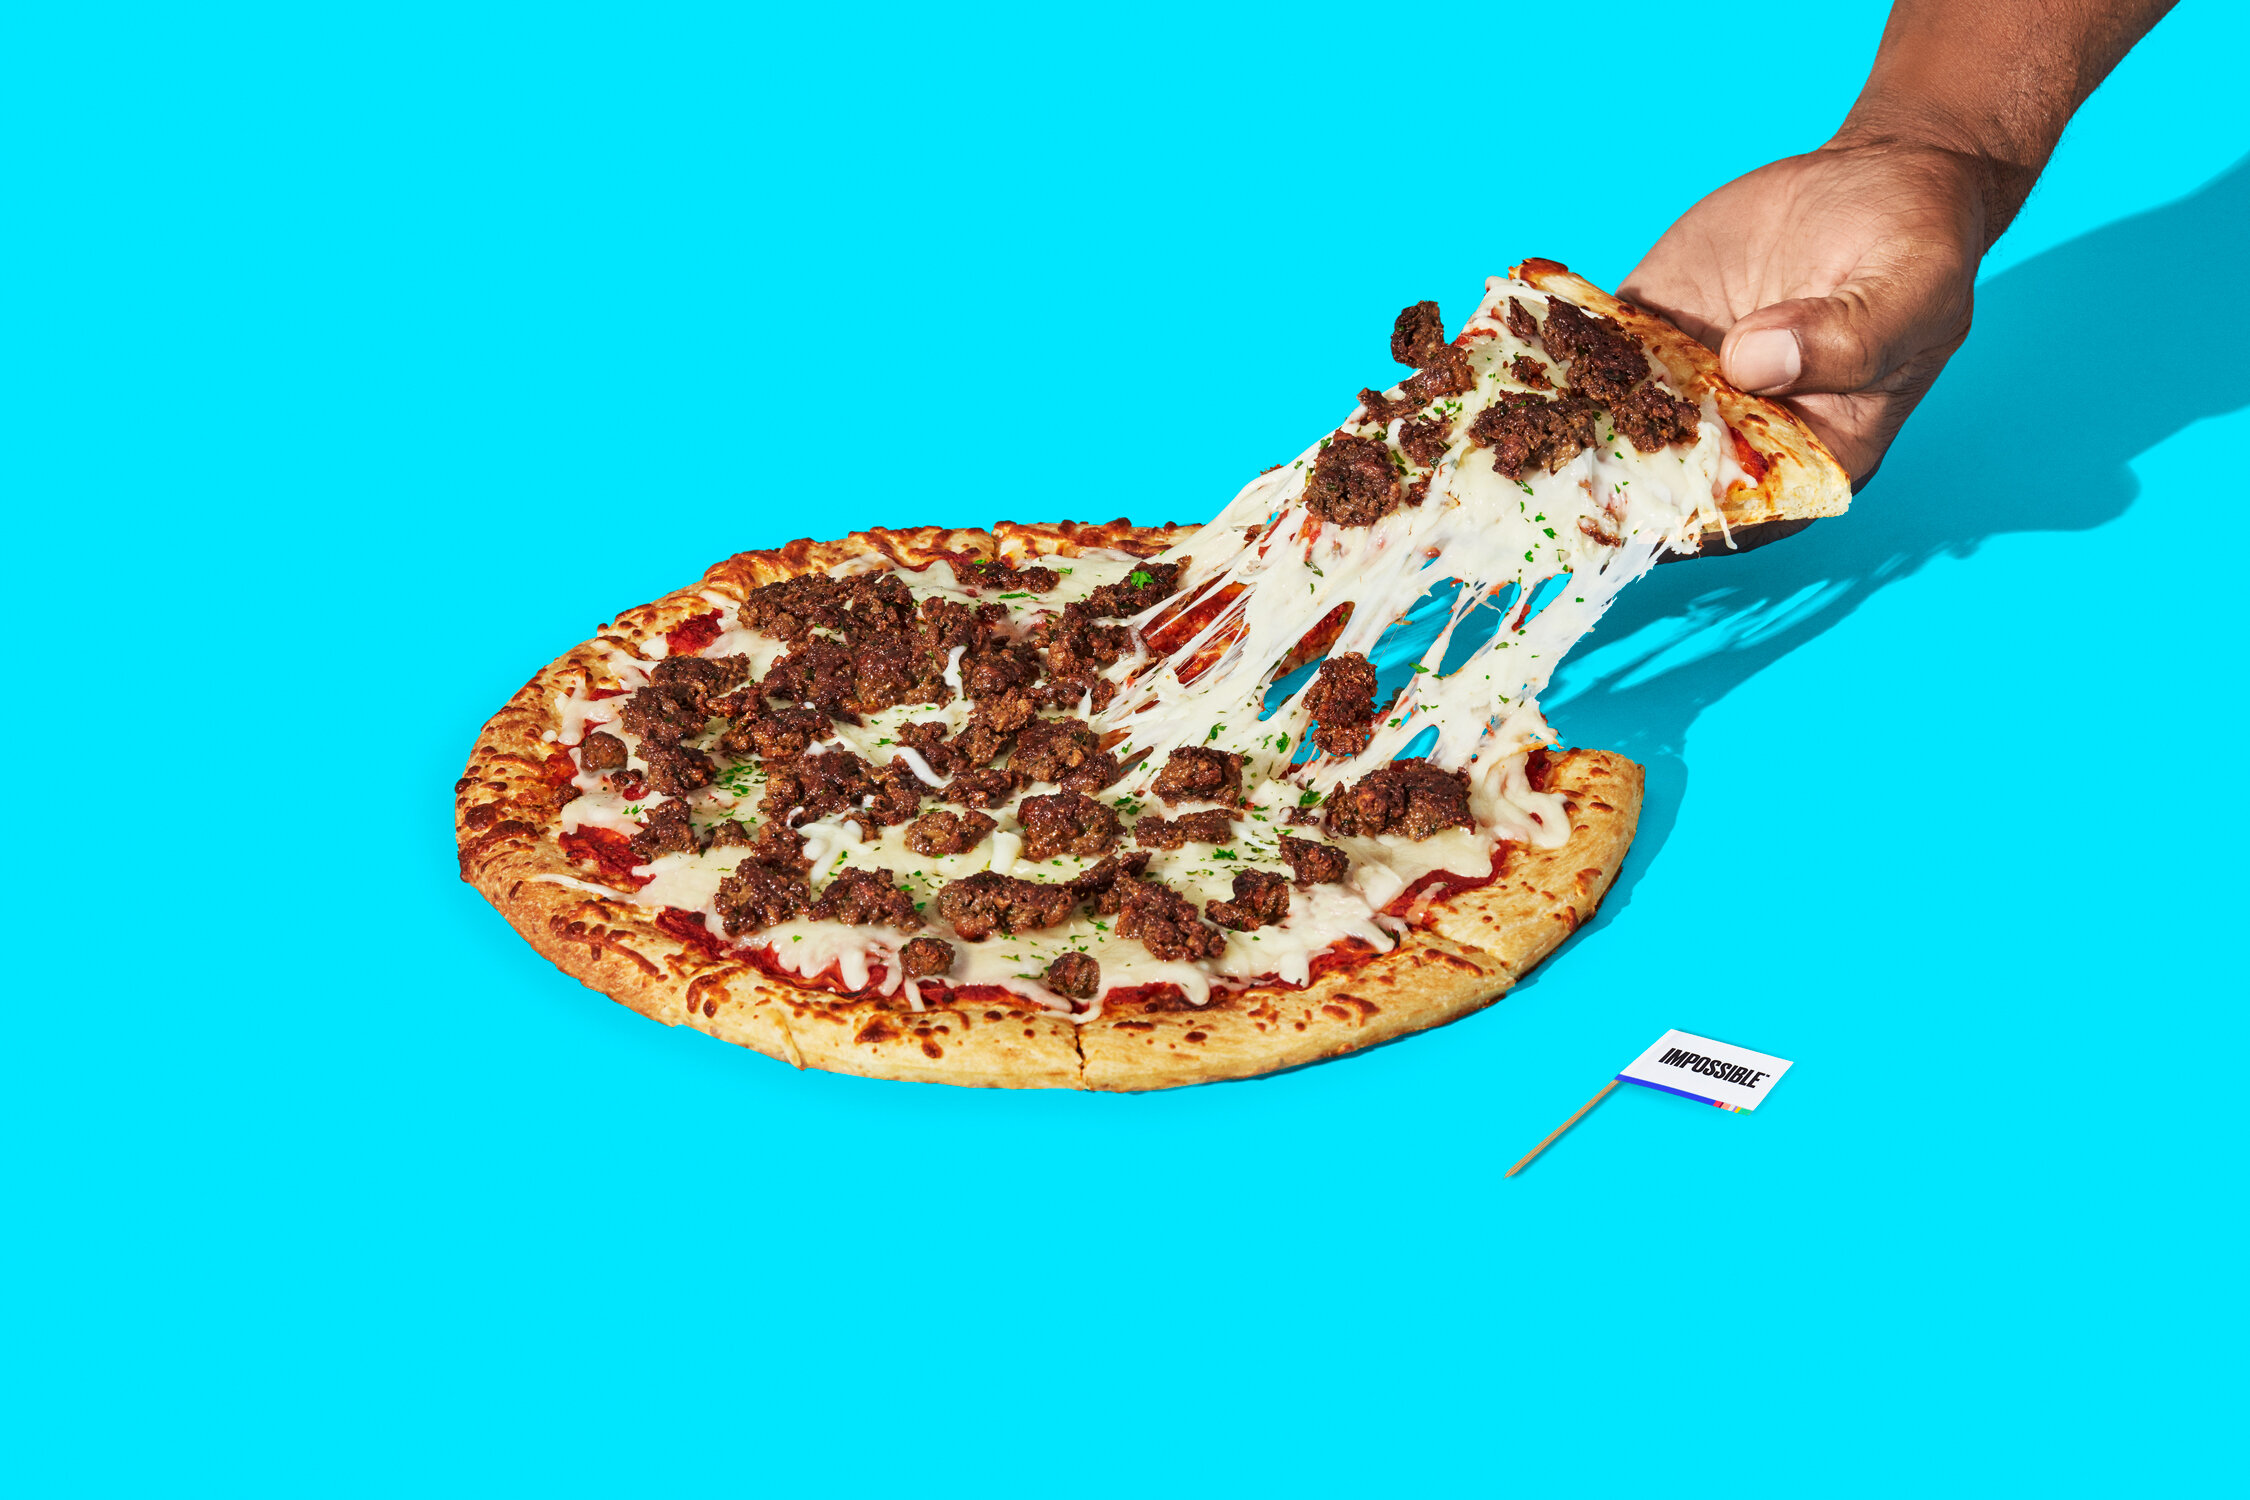 180514_IMPOSSIBLE_FOODS_PRODUCT_BEEF-PIZZA_4117-v2.crop.jpg